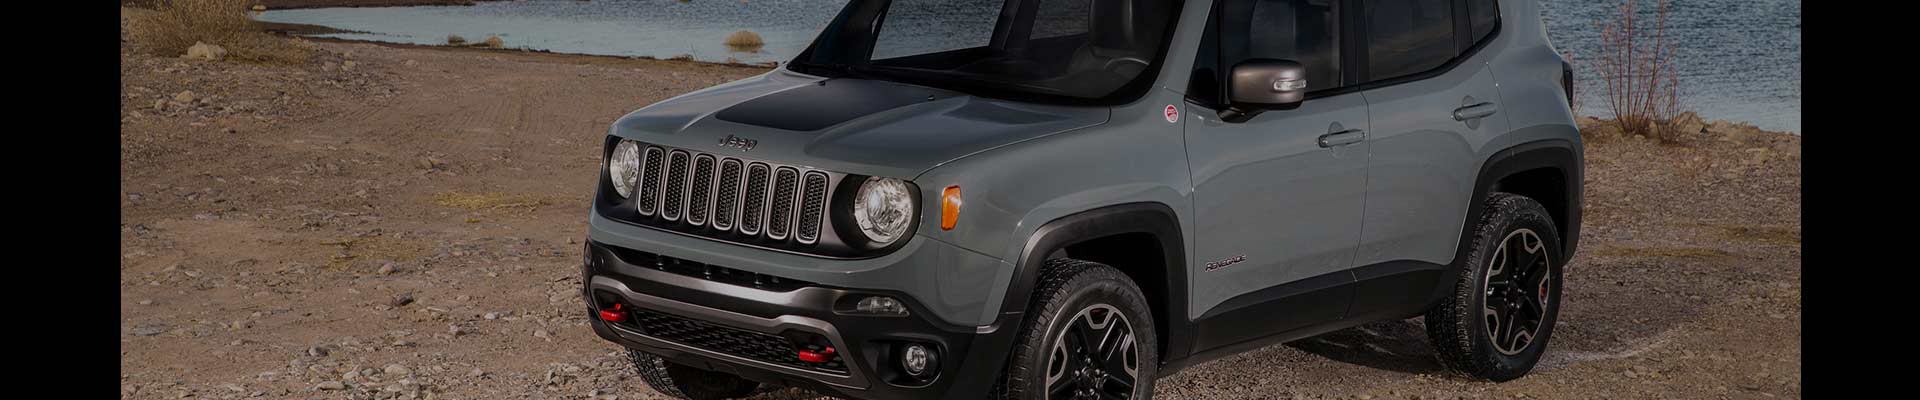 Shop Replacement and OEM 2015 Jeep Renegade Parts with Discounted Price on the Net